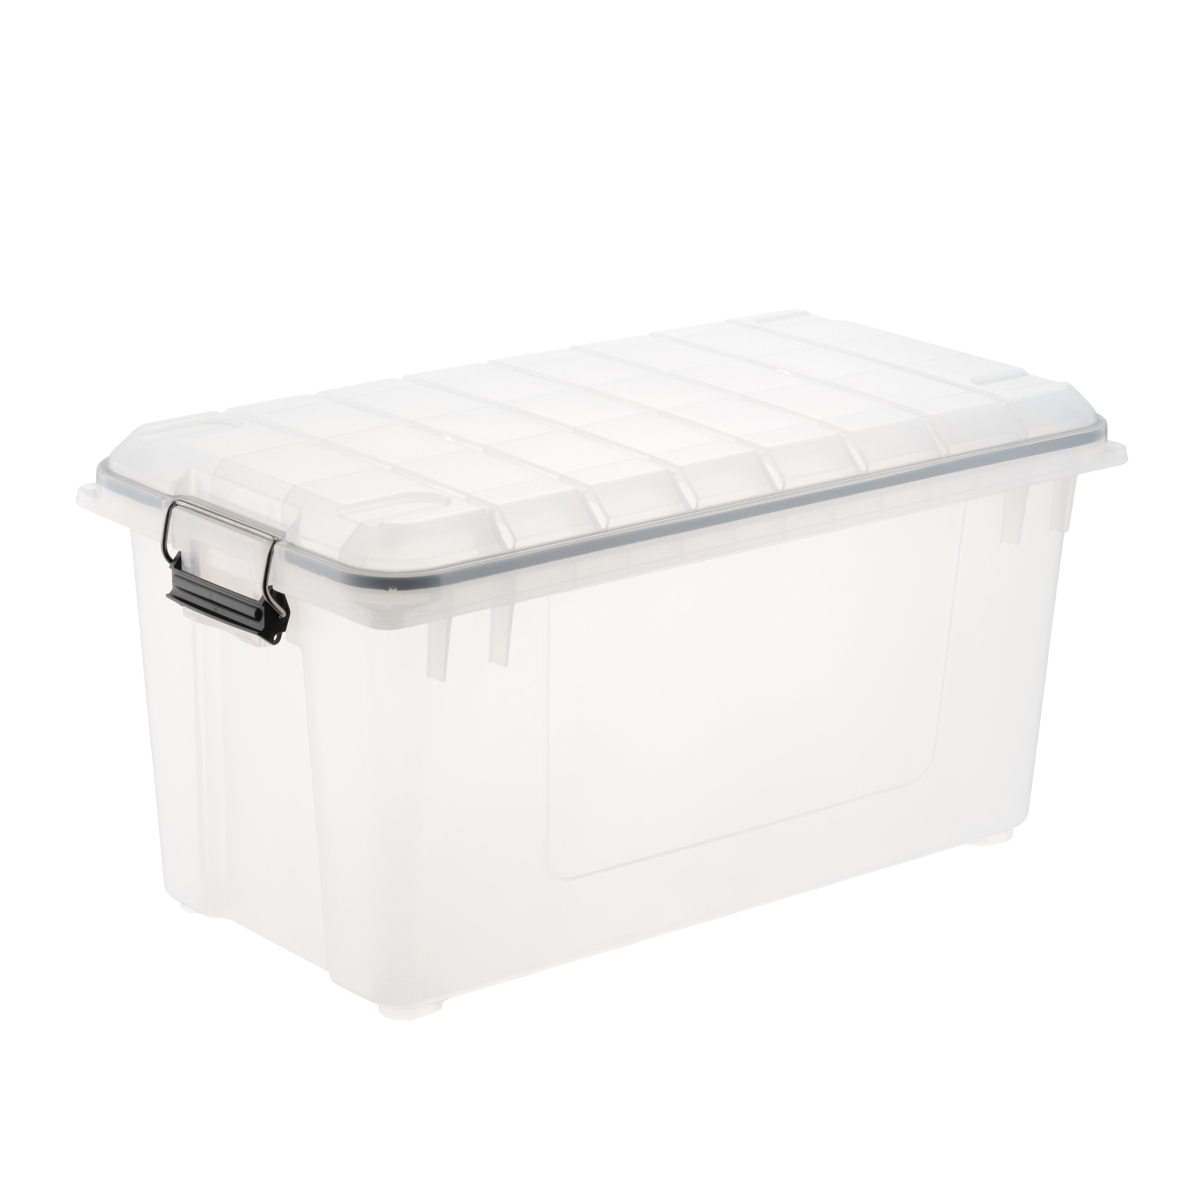 https://www.containerstore.com/catalogimages/433356/10048966-weathertight-trunk-20gal.jpg